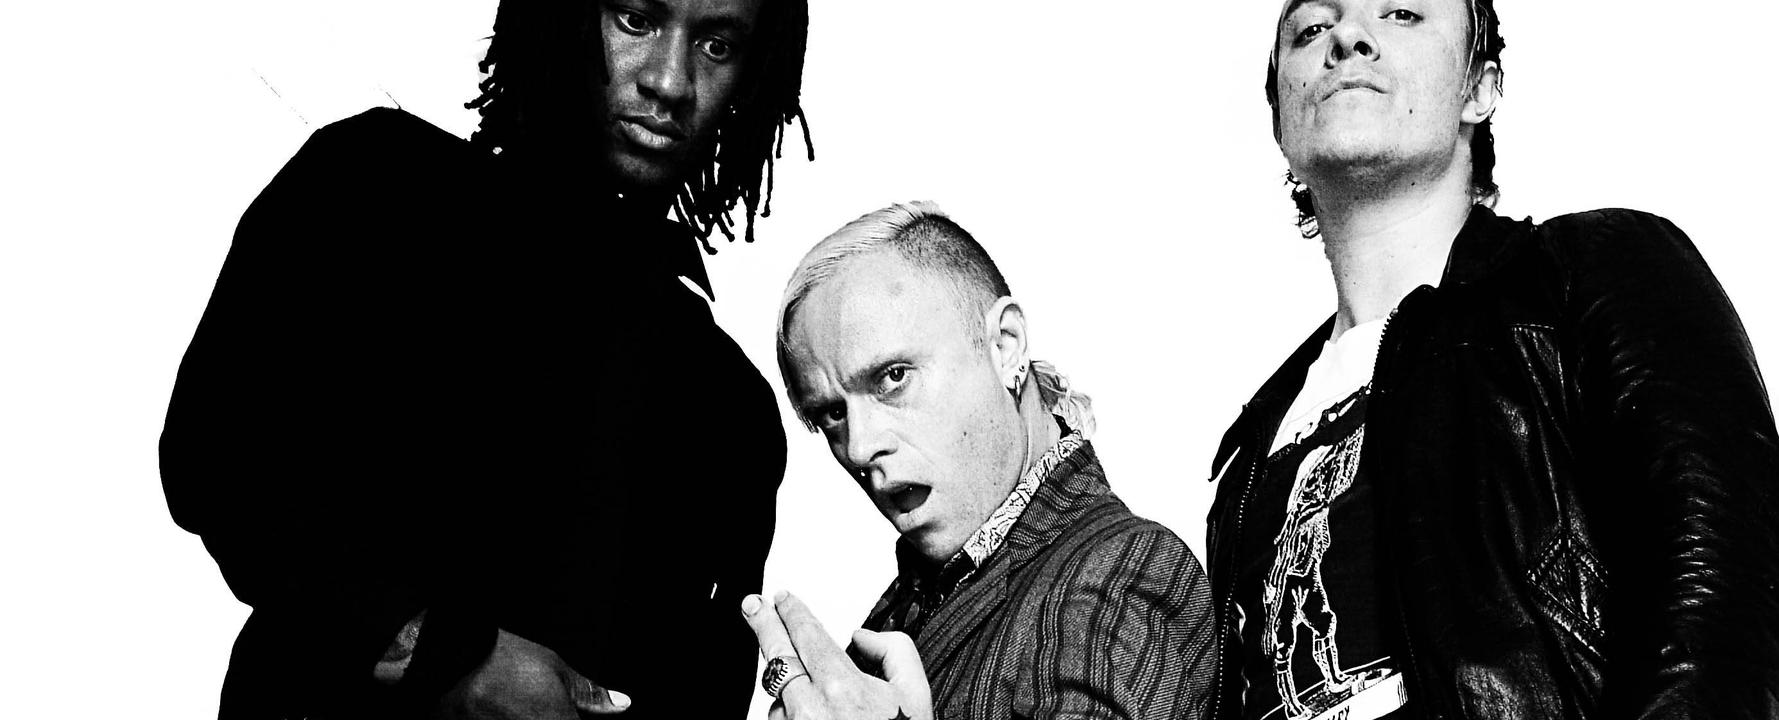 Promotional photograph of The Prodigy.